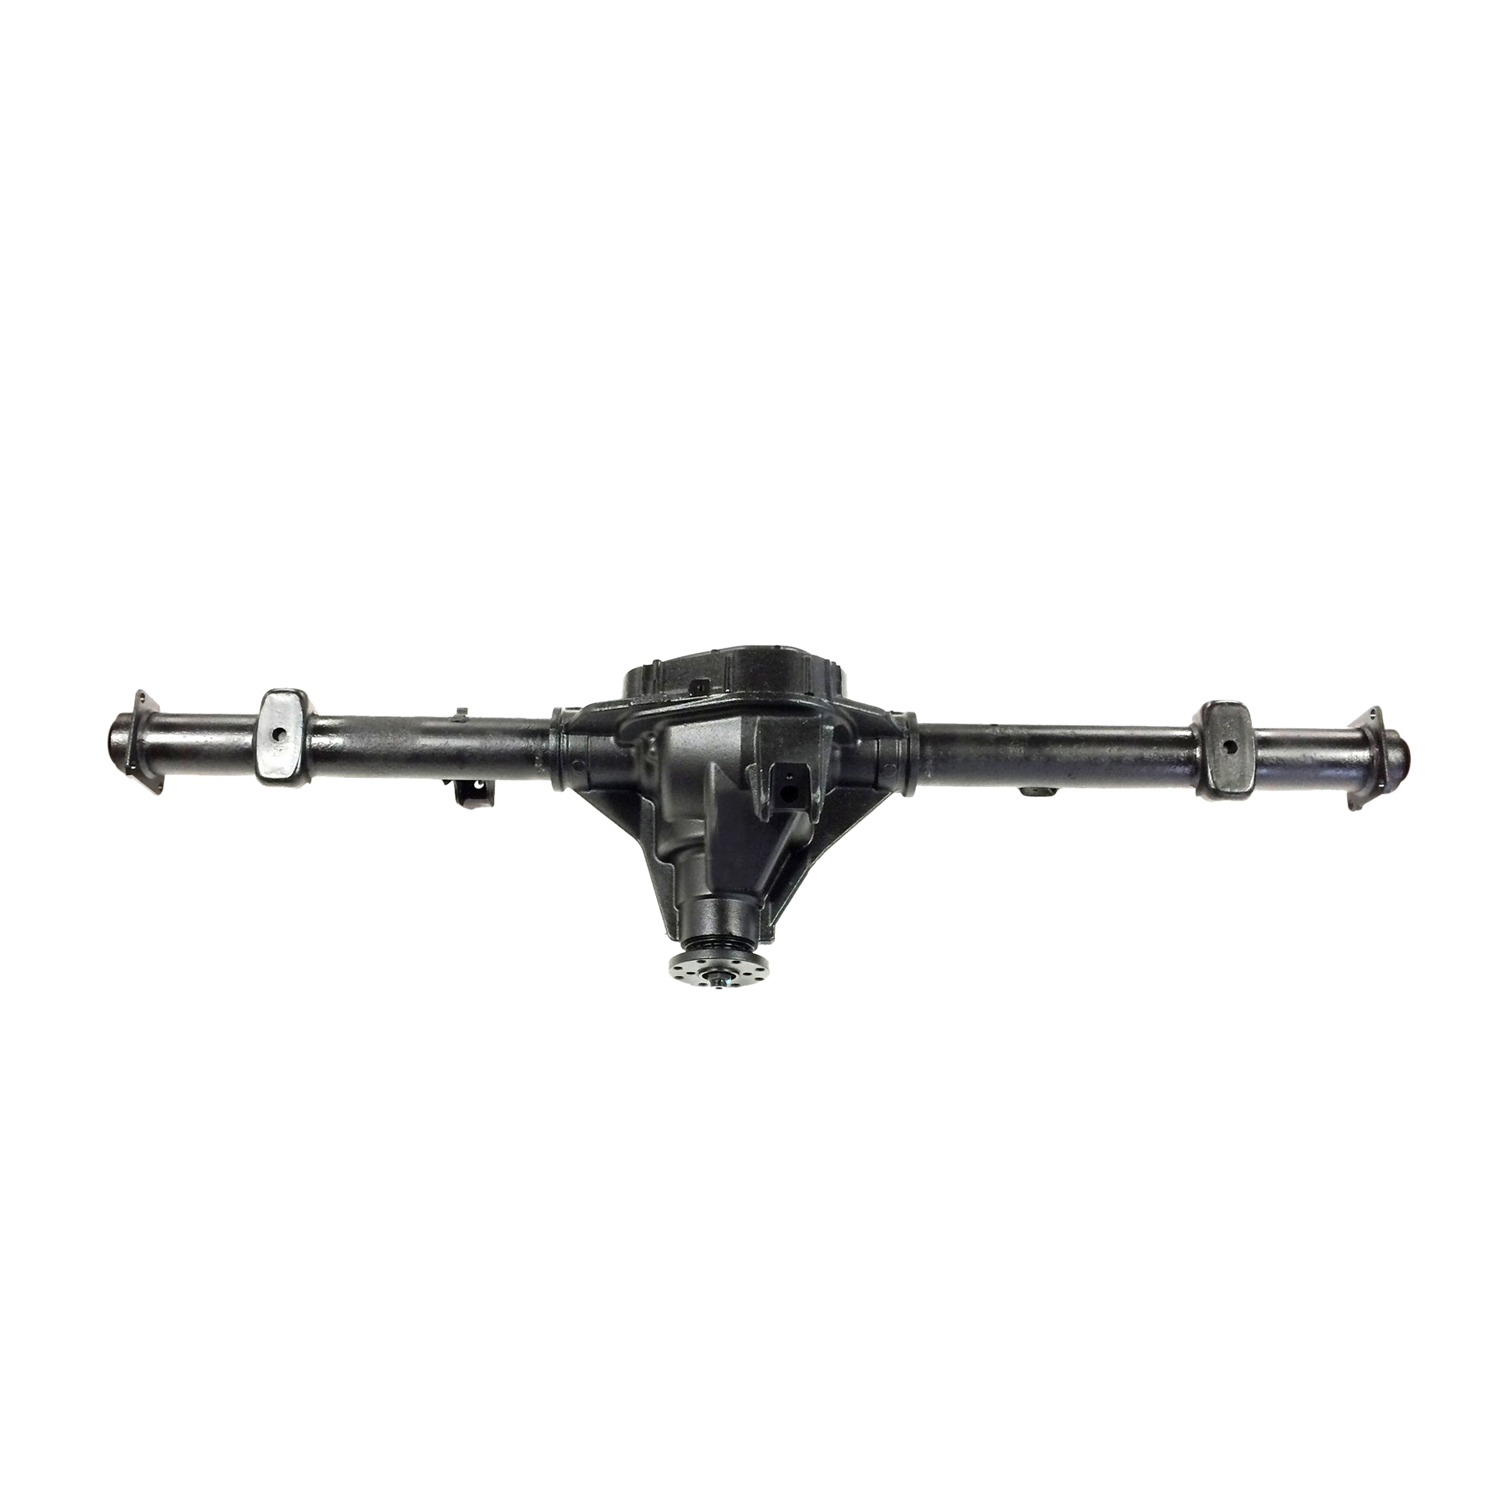 Remanufactured Complete Axle Assembly for Ford 9.75" 09-10 Ford F150 3.73 Ratio, Posi LSD